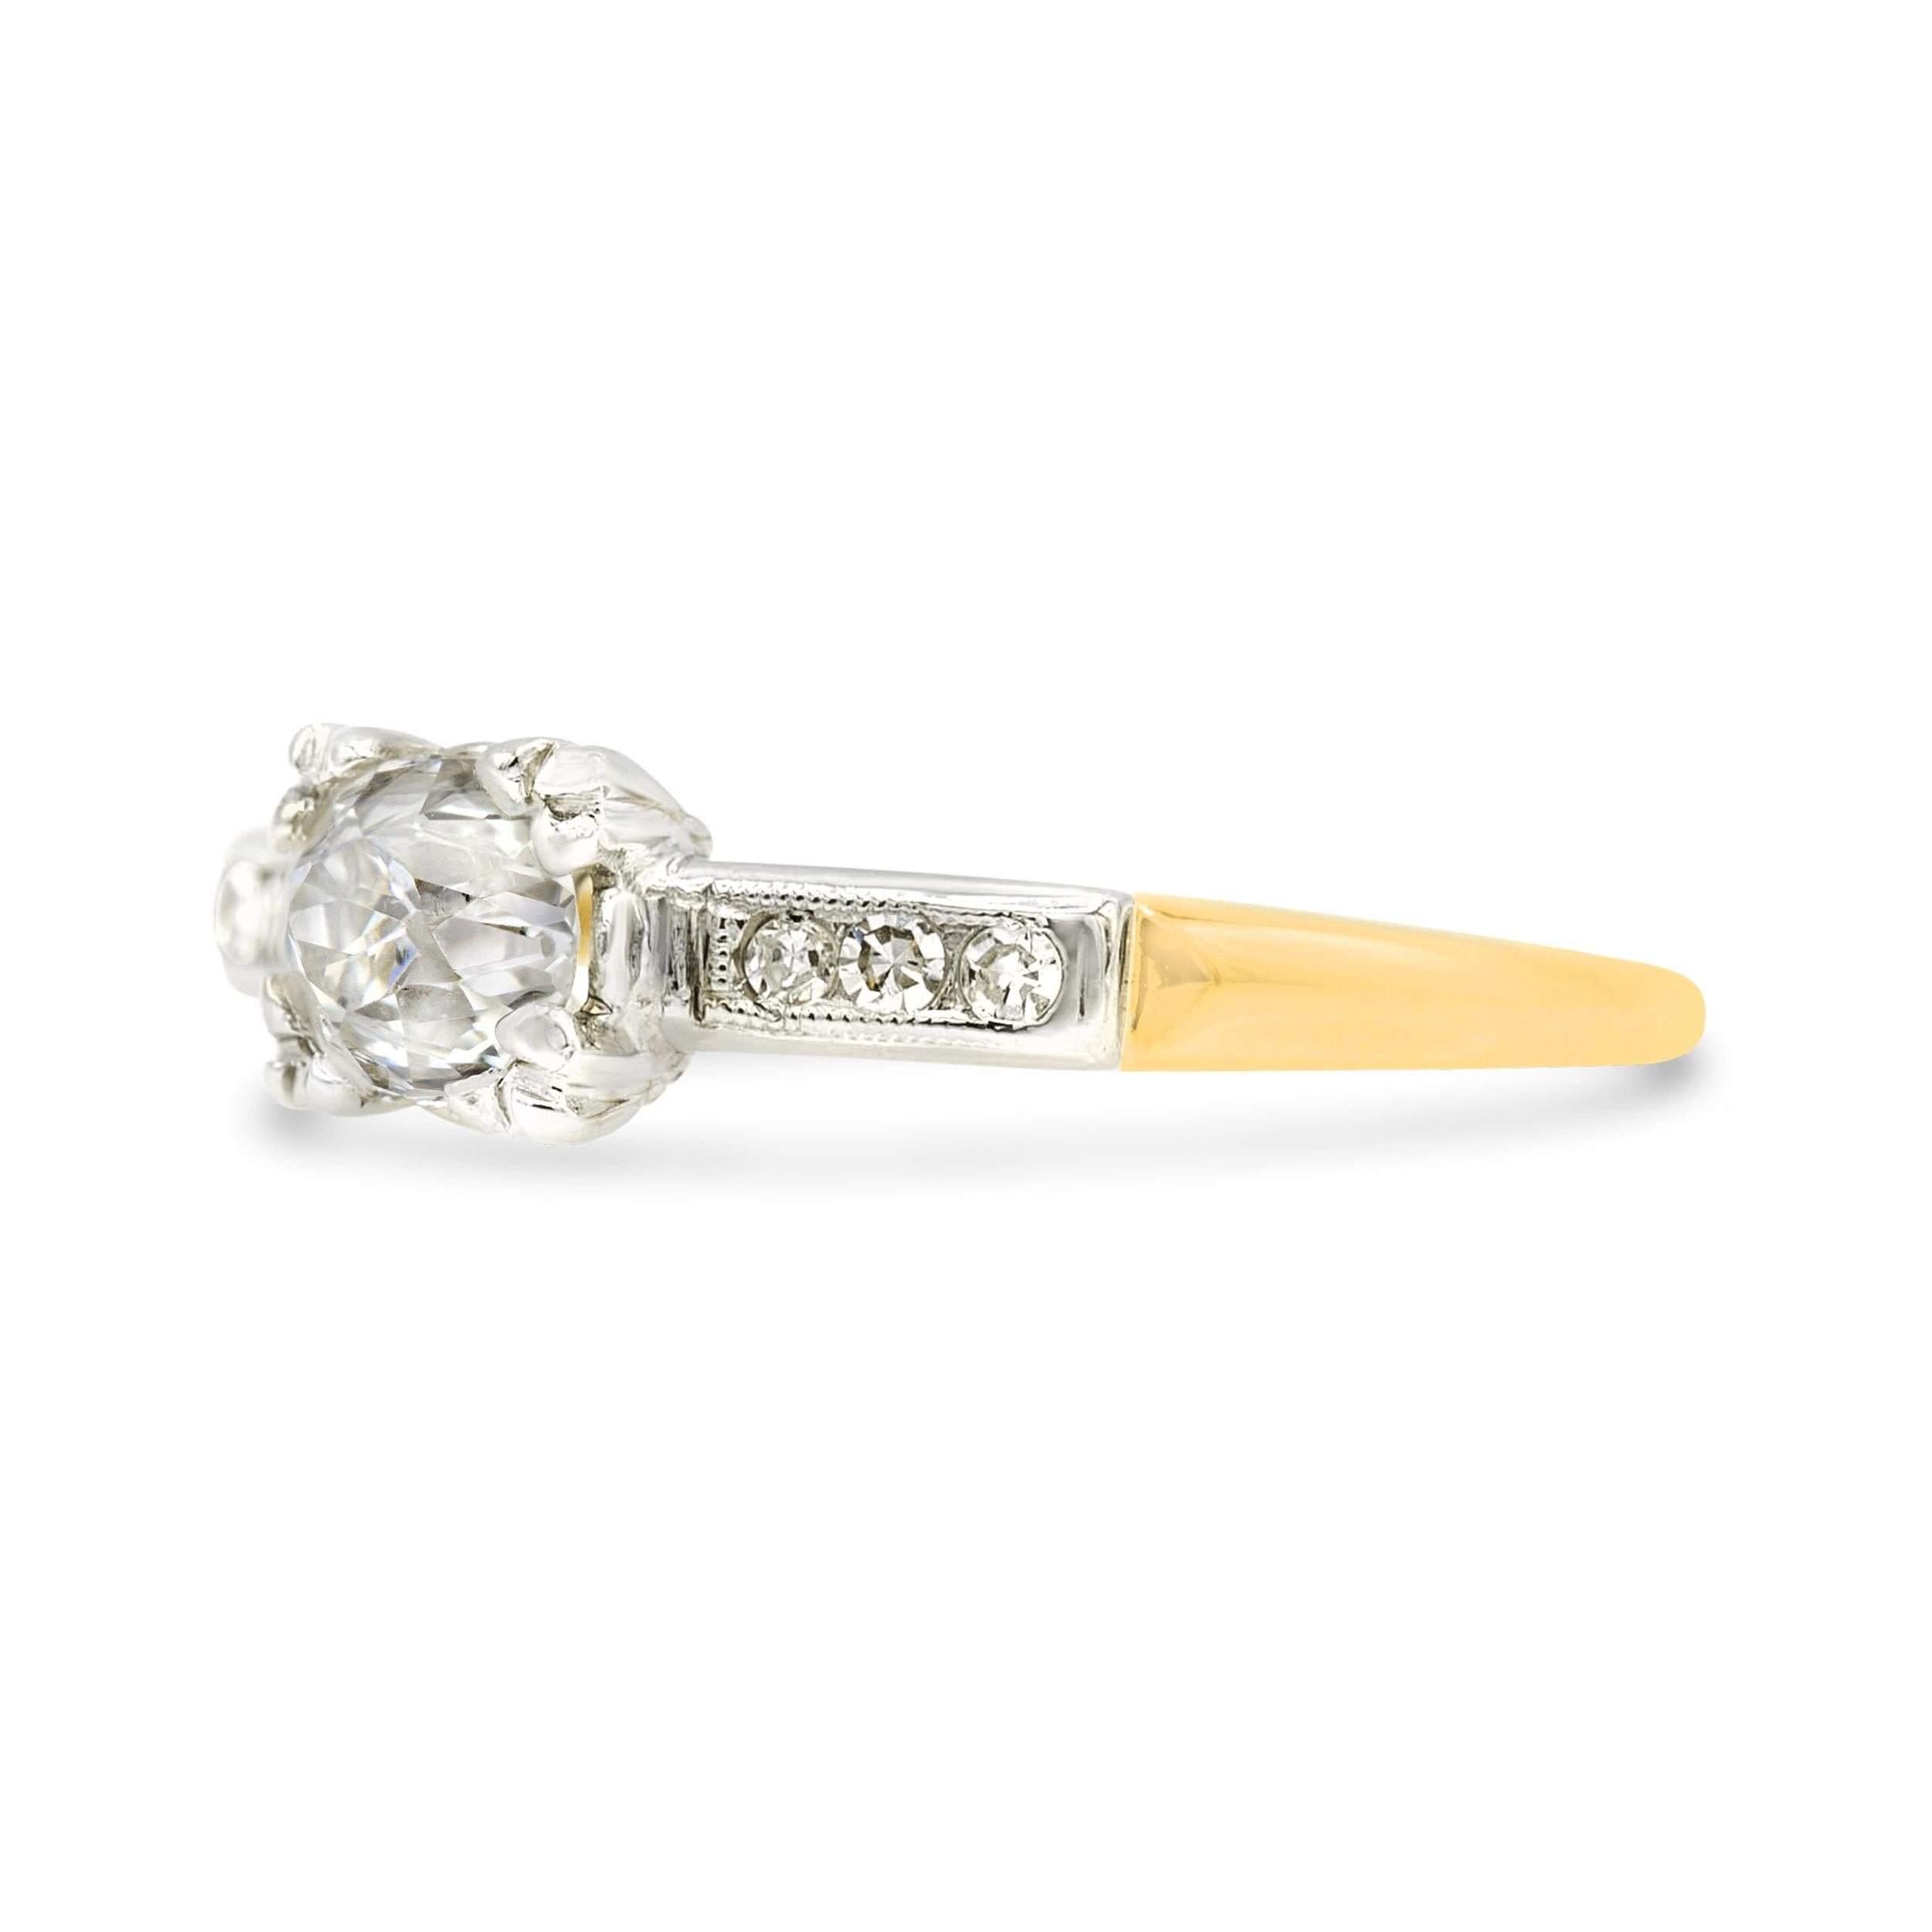 At the center of this sweet and charming ring sits a lively old European diamond. It has classic antique proportions with a small table and chunky facet patterns. The nearly colorless diamond shines bright in a fishtail prong basket and is accented